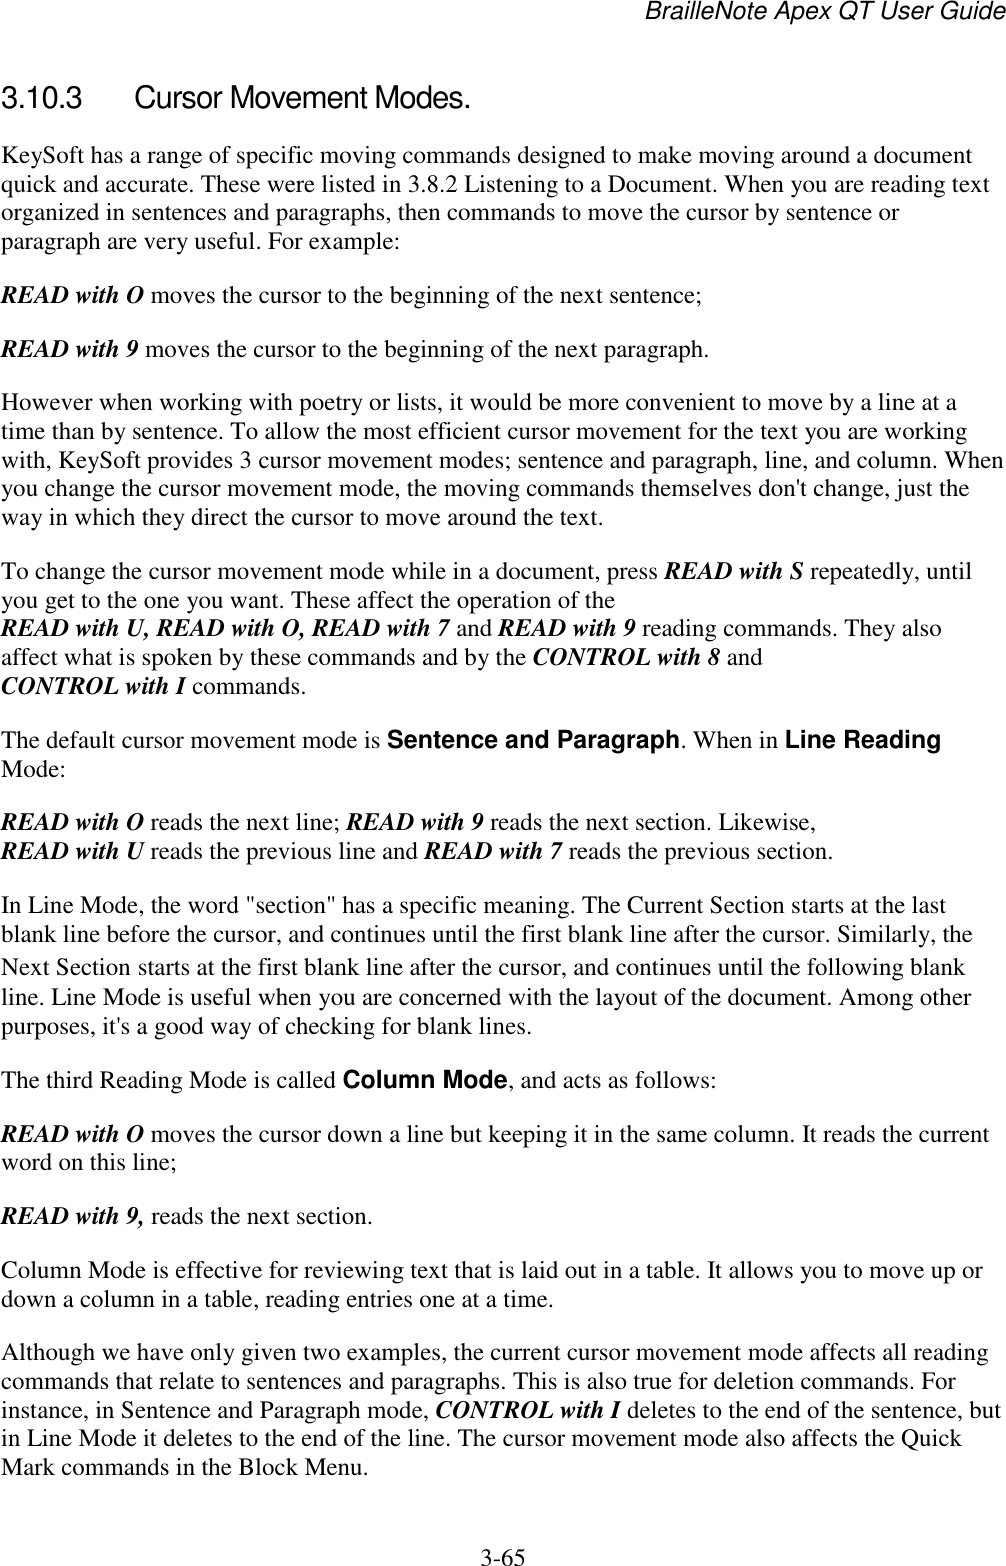 BrailleNote Apex QT User Guide  3-65   3.10.3  Cursor Movement Modes. KeySoft has a range of specific moving commands designed to make moving around a document quick and accurate. These were listed in 3.8.2 Listening to a Document. When you are reading text organized in sentences and paragraphs, then commands to move the cursor by sentence or paragraph are very useful. For example: READ with O moves the cursor to the beginning of the next sentence; READ with 9 moves the cursor to the beginning of the next paragraph. However when working with poetry or lists, it would be more convenient to move by a line at a time than by sentence. To allow the most efficient cursor movement for the text you are working with, KeySoft provides 3 cursor movement modes; sentence and paragraph, line, and column. When you change the cursor movement mode, the moving commands themselves don&apos;t change, just the way in which they direct the cursor to move around the text. To change the cursor movement mode while in a document, press READ with S repeatedly, until you get to the one you want. These affect the operation of the READ with U, READ with O, READ with 7 and READ with 9 reading commands. They also affect what is spoken by these commands and by the CONTROL with 8 and CONTROL with I commands. The default cursor movement mode is Sentence and Paragraph. When in Line Reading Mode: READ with O reads the next line; READ with 9 reads the next section. Likewise, READ with U reads the previous line and READ with 7 reads the previous section. In Line Mode, the word &quot;section&quot; has a specific meaning. The Current Section starts at the last blank line before the cursor, and continues until the first blank line after the cursor. Similarly, the Next Section starts at the first blank line after the cursor, and continues until the following blank line. Line Mode is useful when you are concerned with the layout of the document. Among other purposes, it&apos;s a good way of checking for blank lines. The third Reading Mode is called Column Mode, and acts as follows: READ with O moves the cursor down a line but keeping it in the same column. It reads the current word on this line; READ with 9, reads the next section. Column Mode is effective for reviewing text that is laid out in a table. It allows you to move up or down a column in a table, reading entries one at a time. Although we have only given two examples, the current cursor movement mode affects all reading commands that relate to sentences and paragraphs. This is also true for deletion commands. For instance, in Sentence and Paragraph mode, CONTROL with I deletes to the end of the sentence, but in Line Mode it deletes to the end of the line. The cursor movement mode also affects the Quick Mark commands in the Block Menu. 